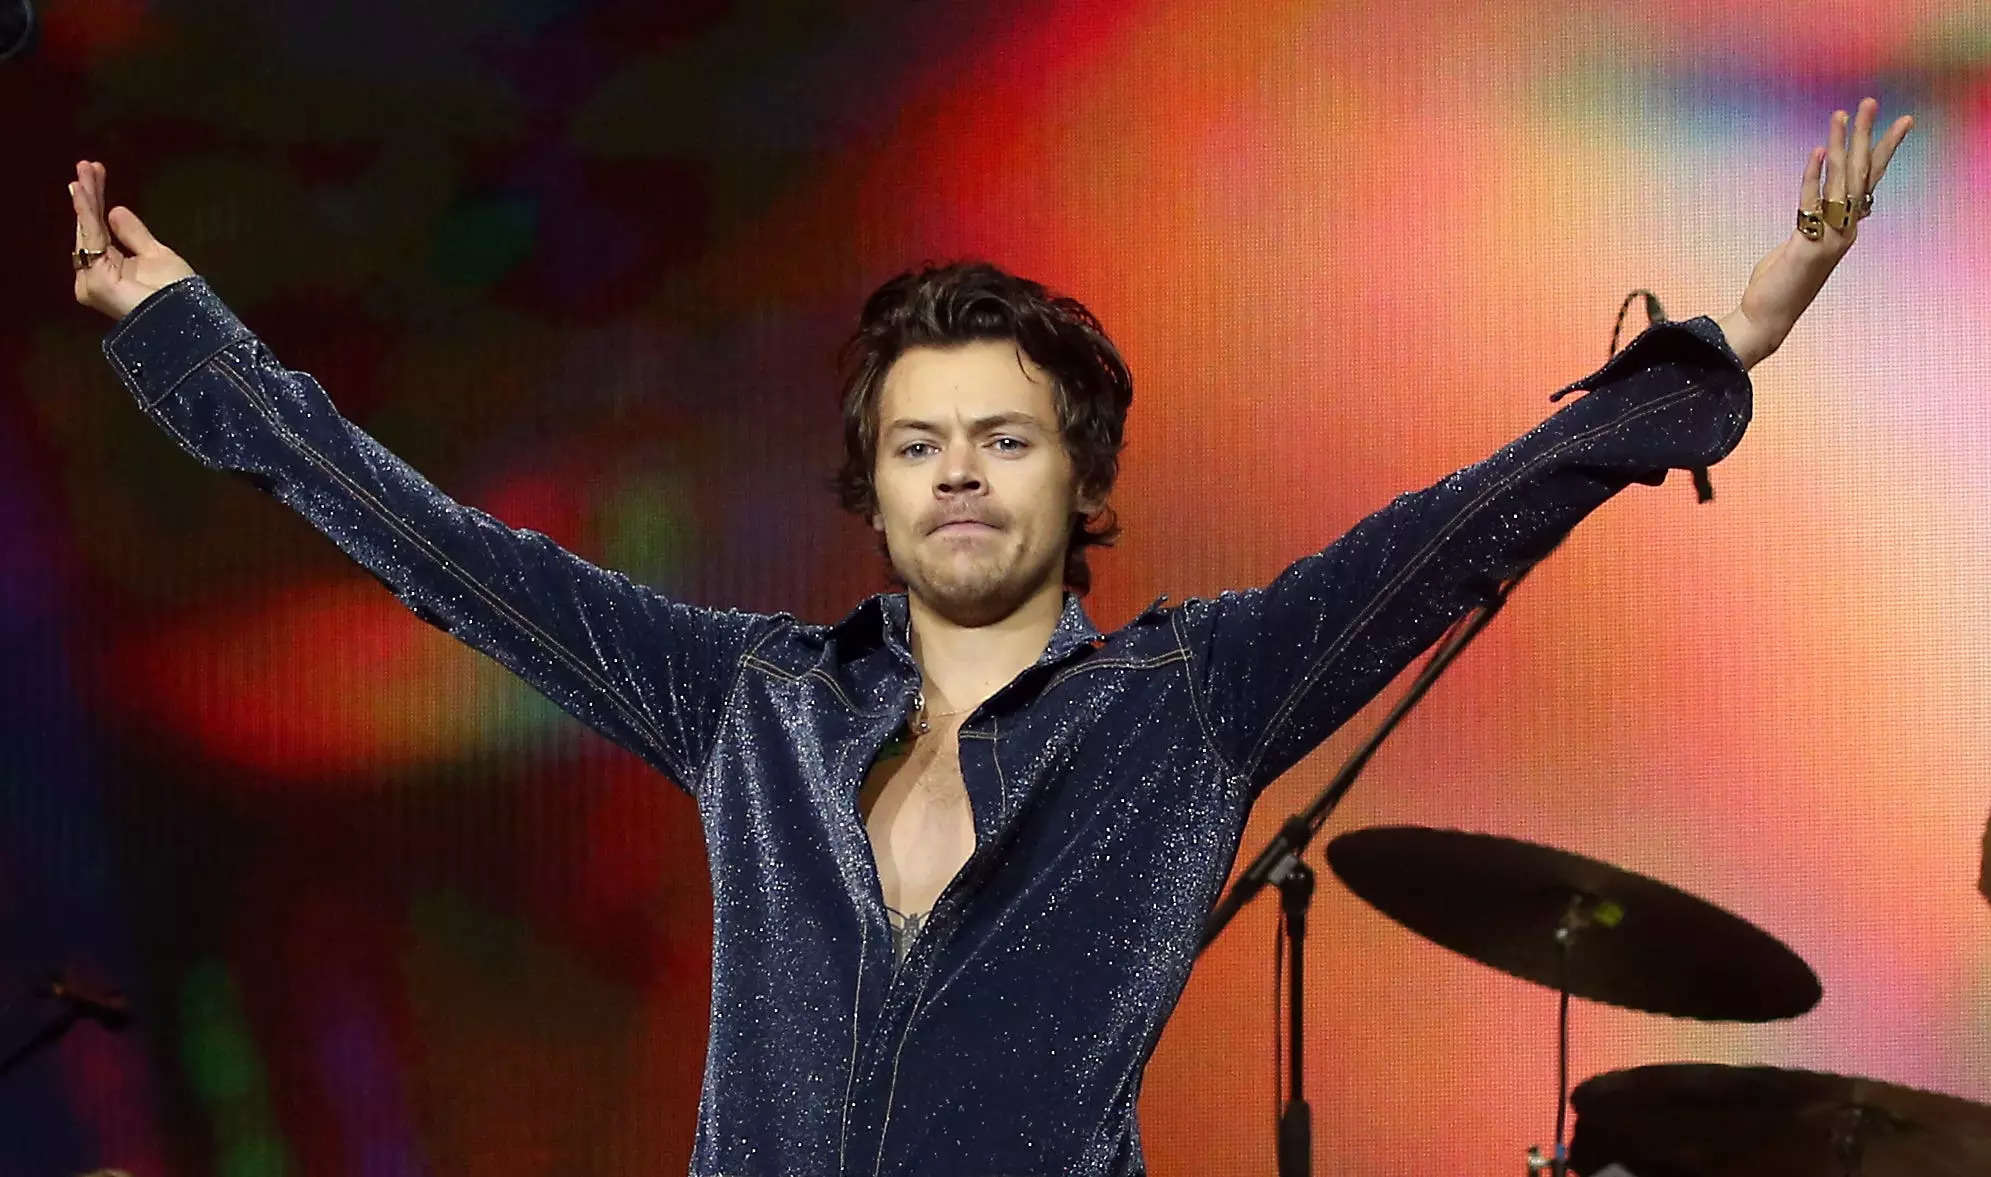 Harry Styles just paused a show so a pregnant woman could pee